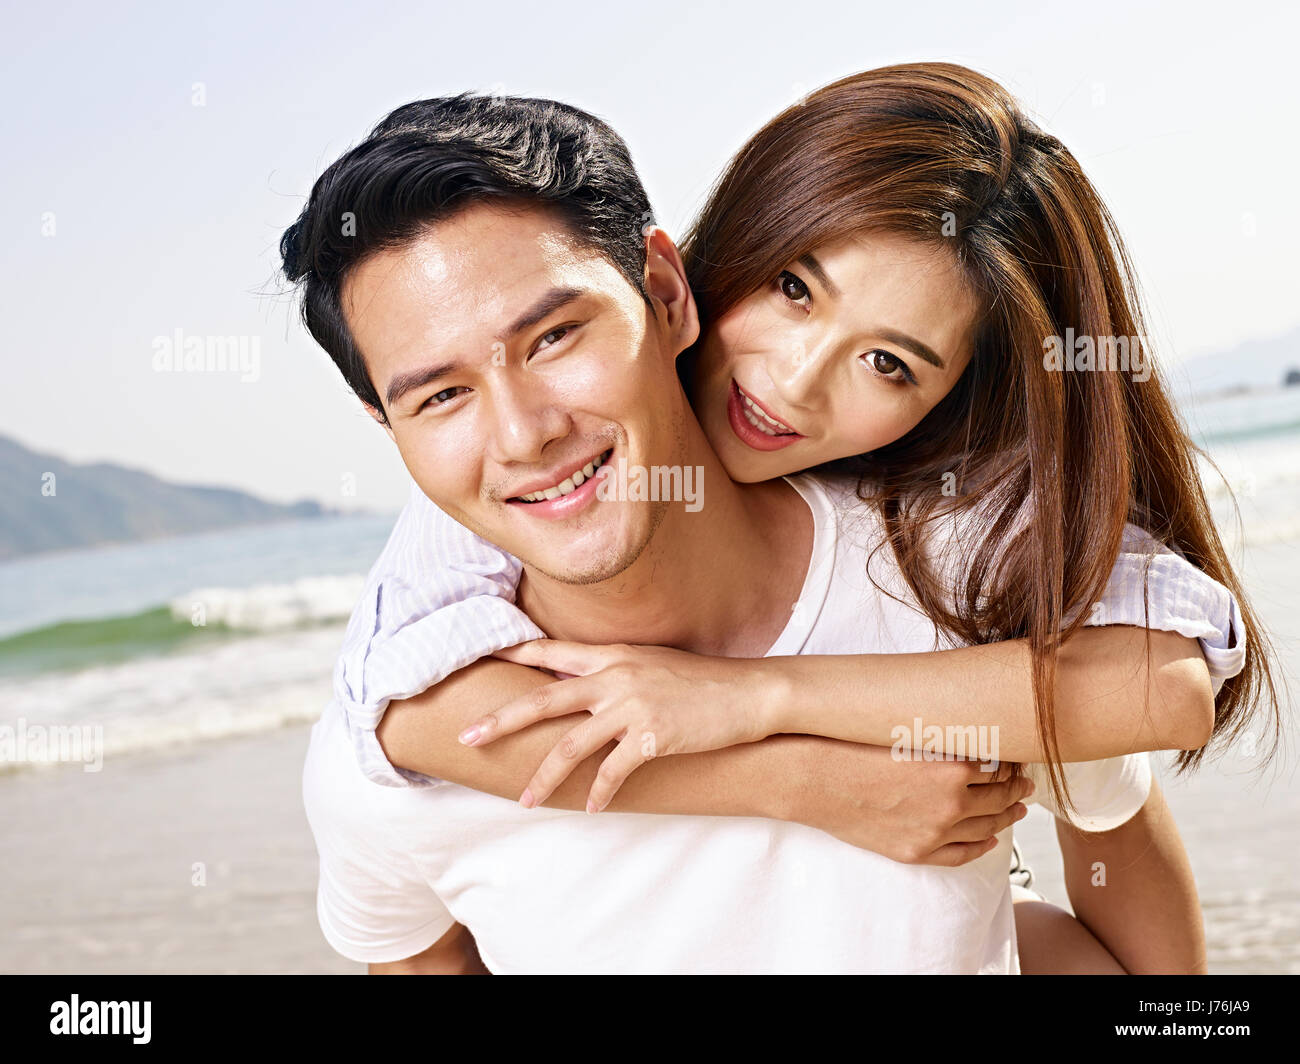 young asian man carrying girlfriend or wife on back on beach. Stock Photo